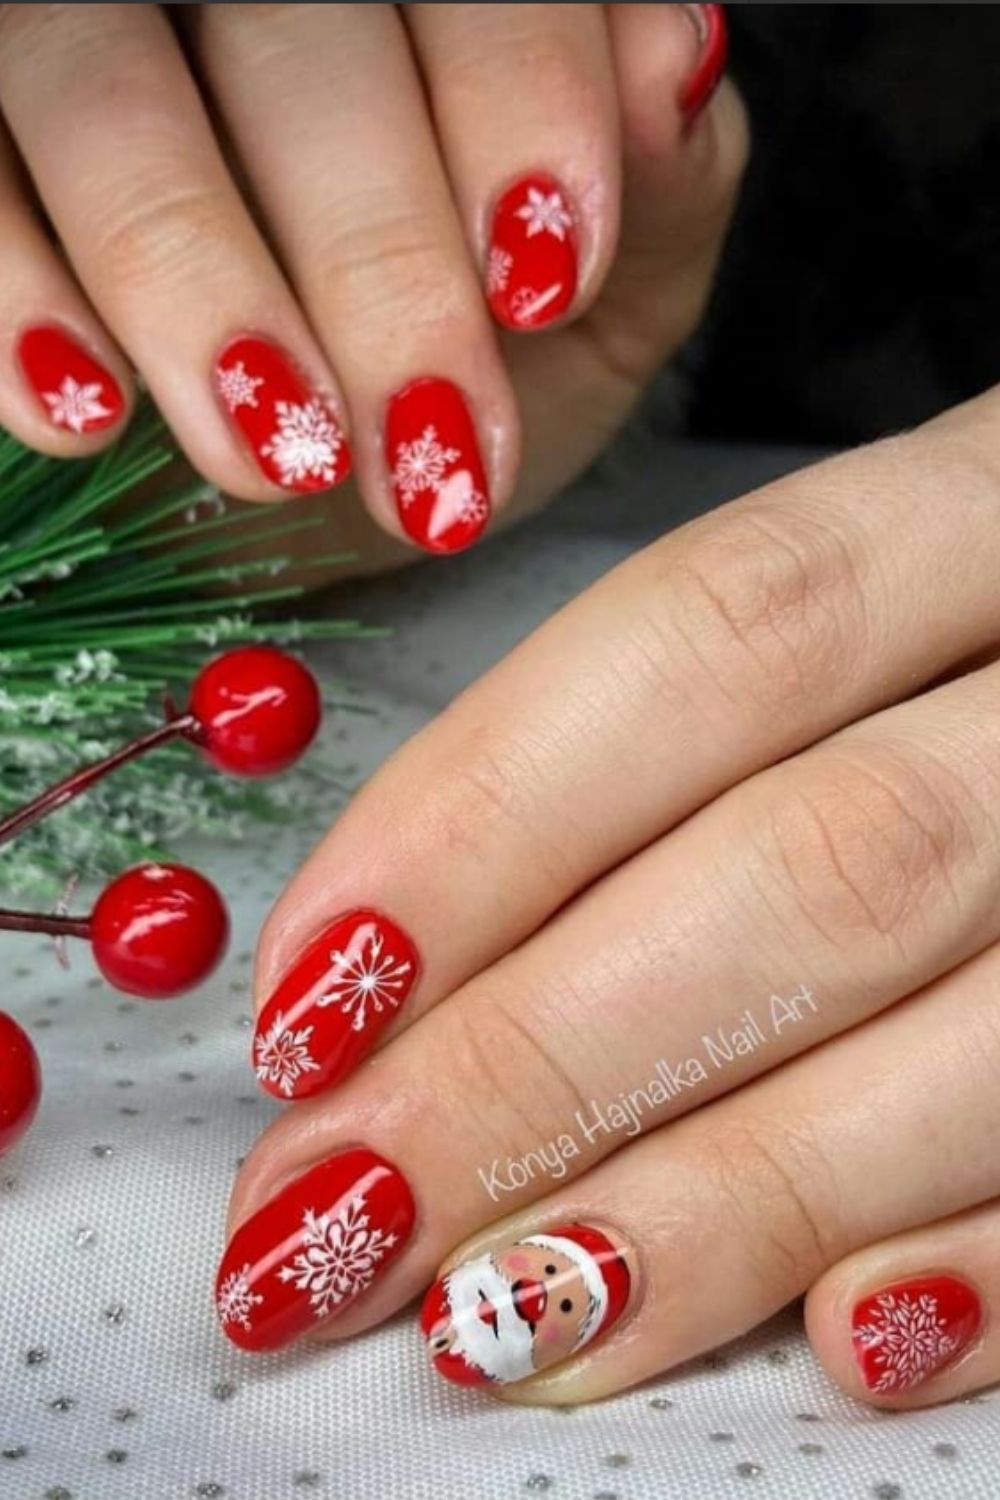 Red short nails art with snowflake